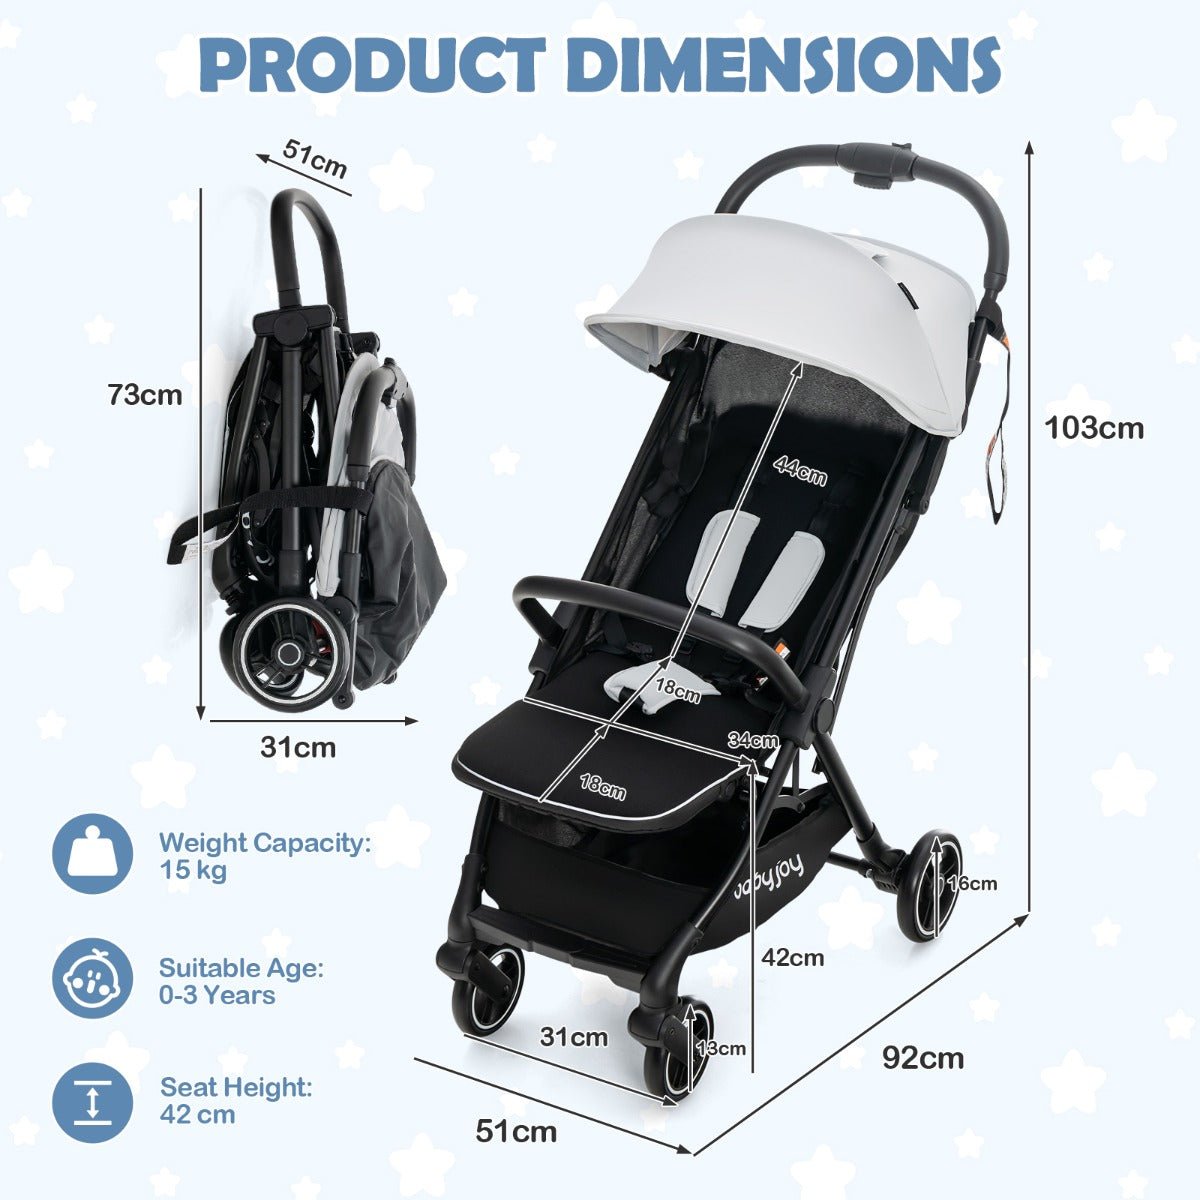 Explore with Ease: Grey Folding Baby Stroller